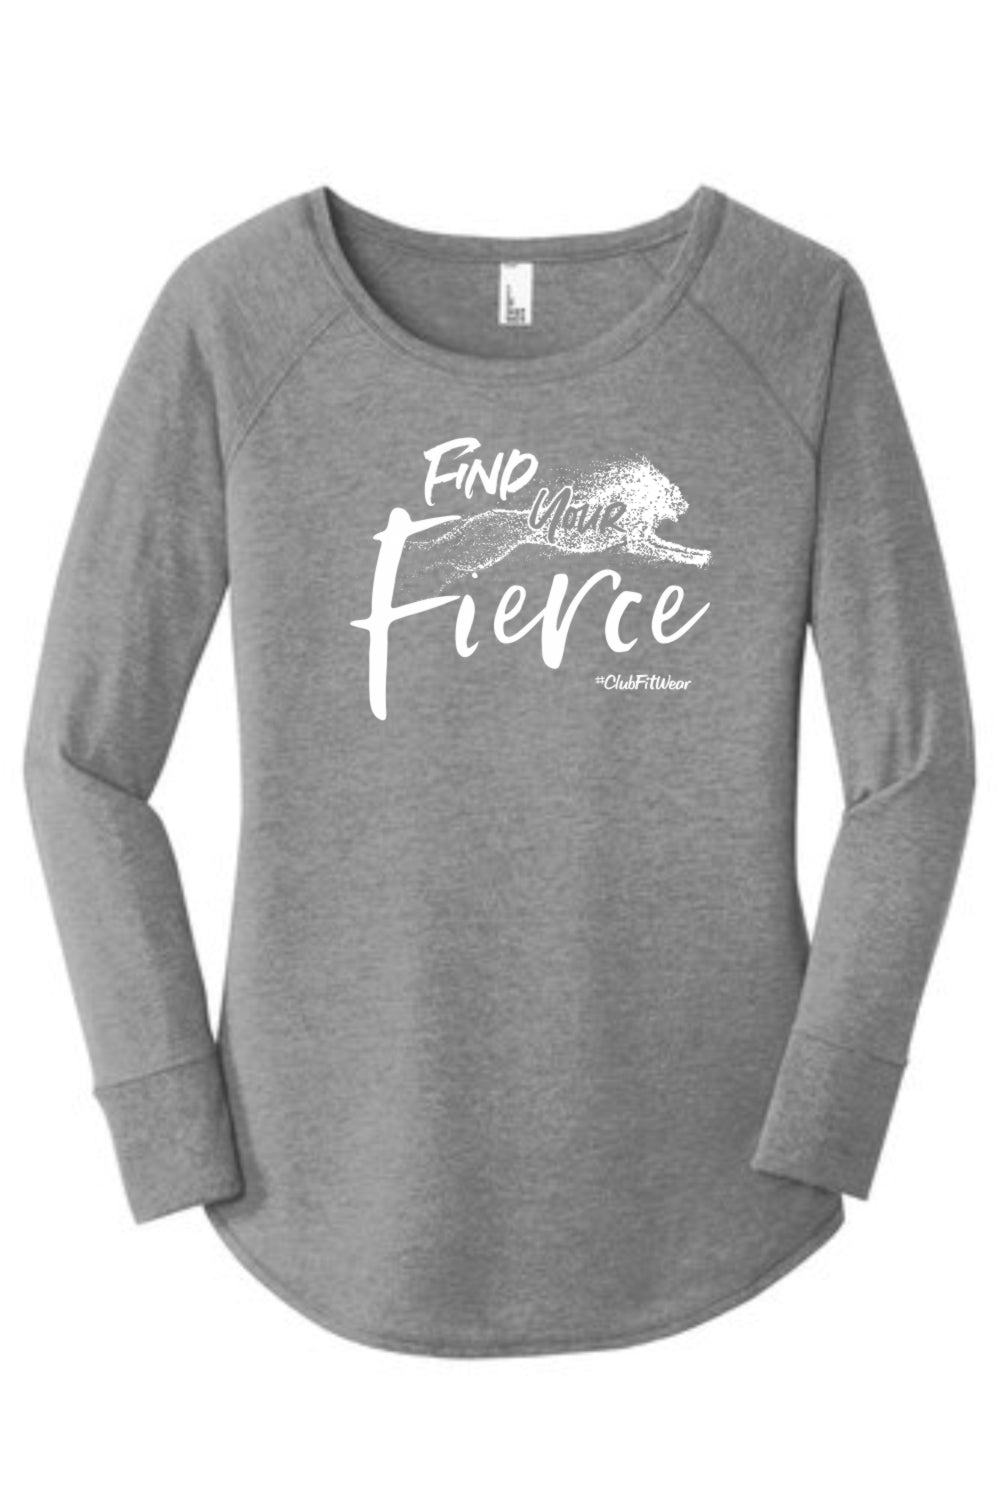 Find your Fierce - Long Sleeve Tunic